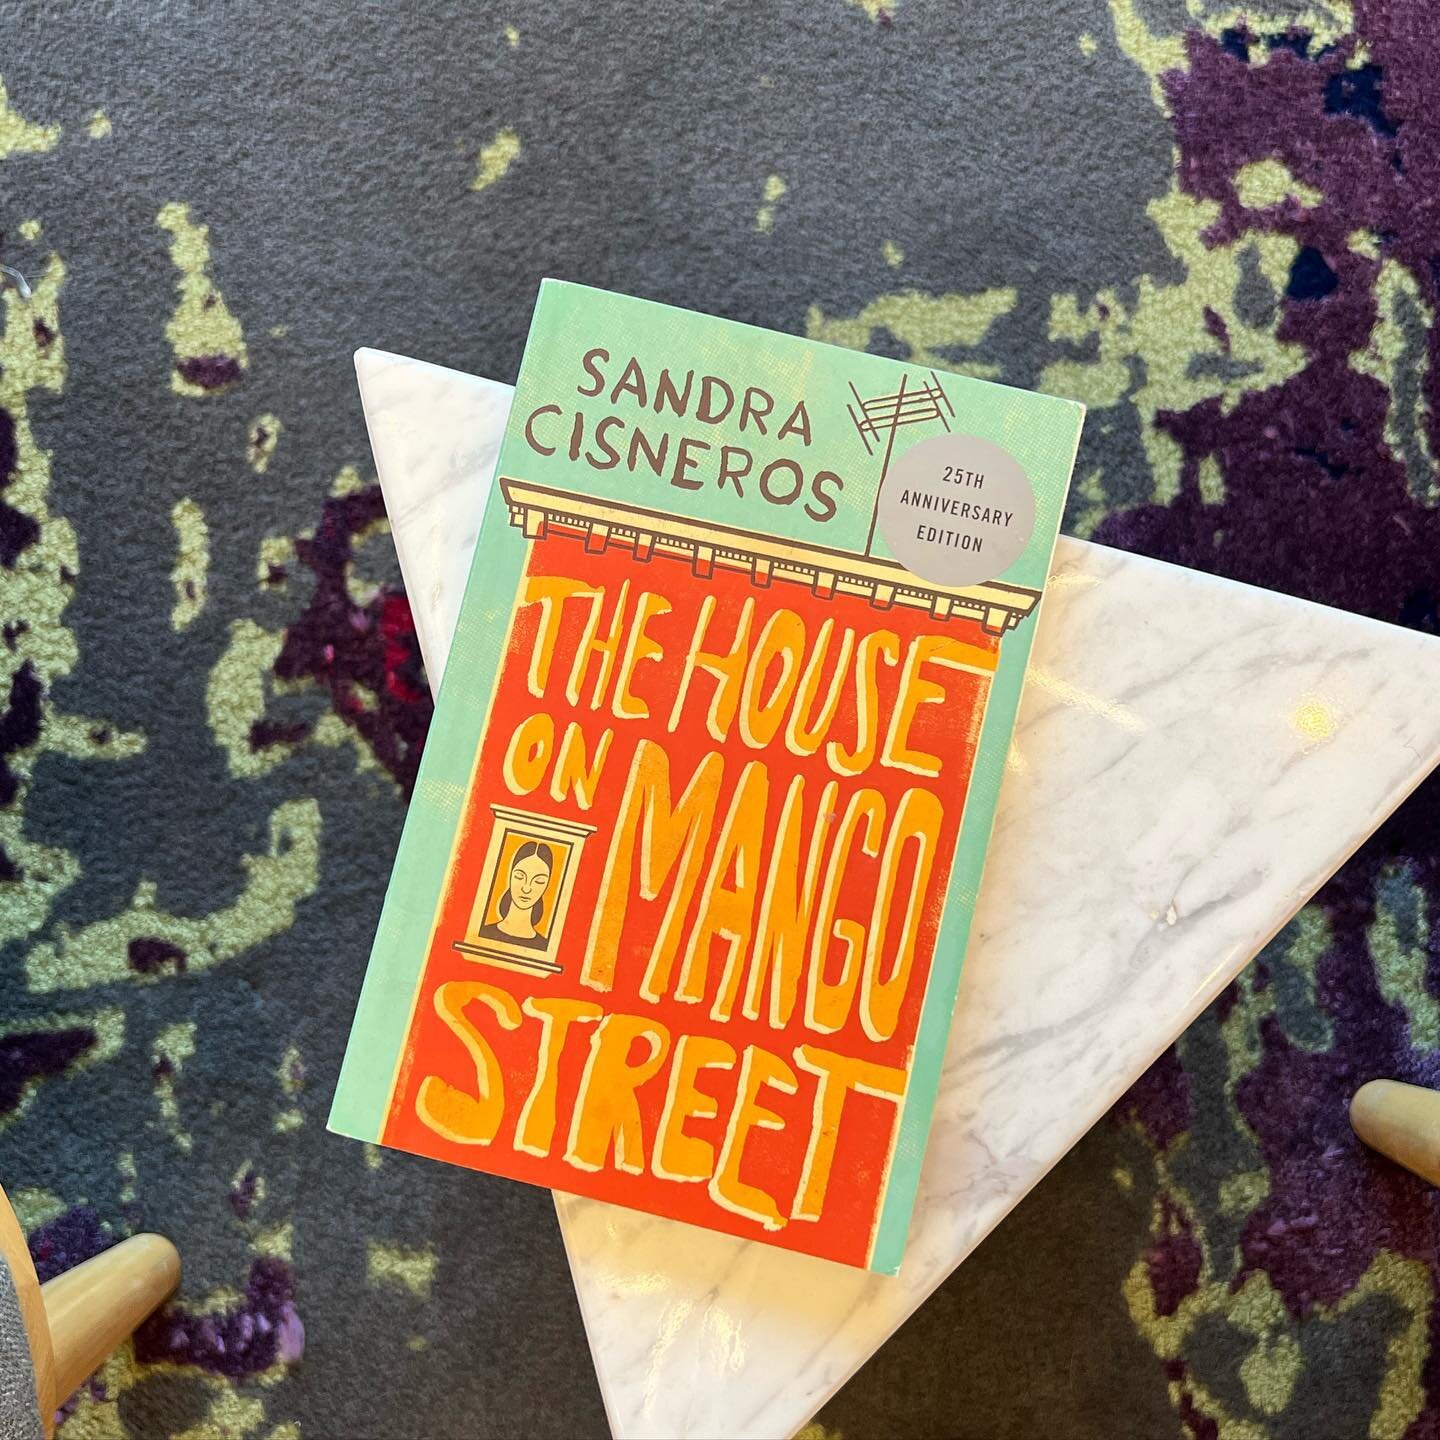 In &lsquo;The House on Mango Street,&rsquo; Sandra Cisneros tells the story of a young Latina girl growing up in Chicago. The book is broken up into short stories that vividly share key experiences of Esperanza Cordero&rsquo;s life. 

&ldquo;The Fami